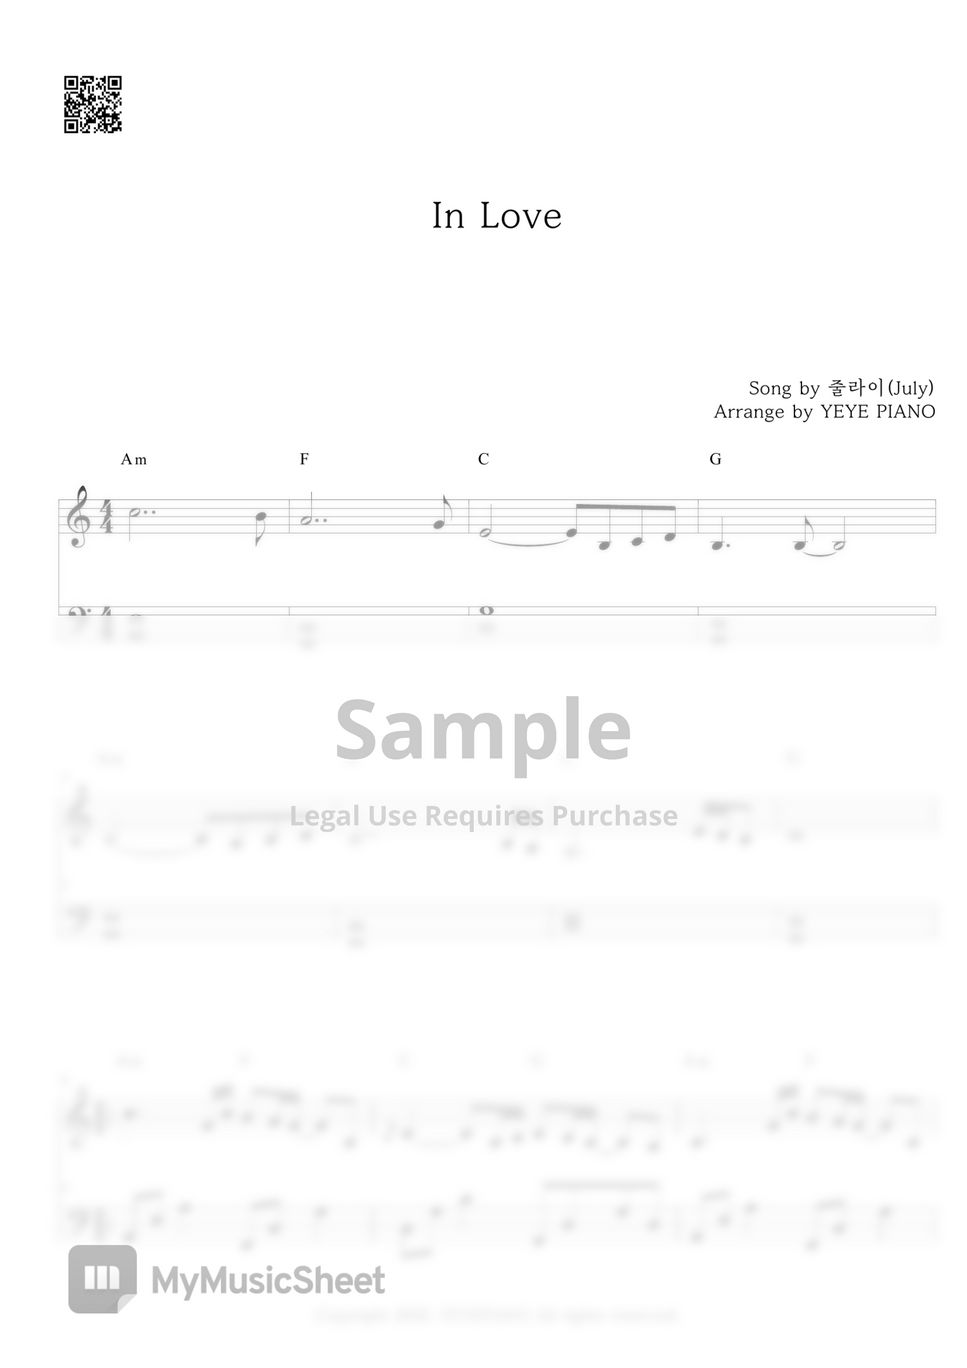 July - In Love (Easy ver.) by YEYE PIANO